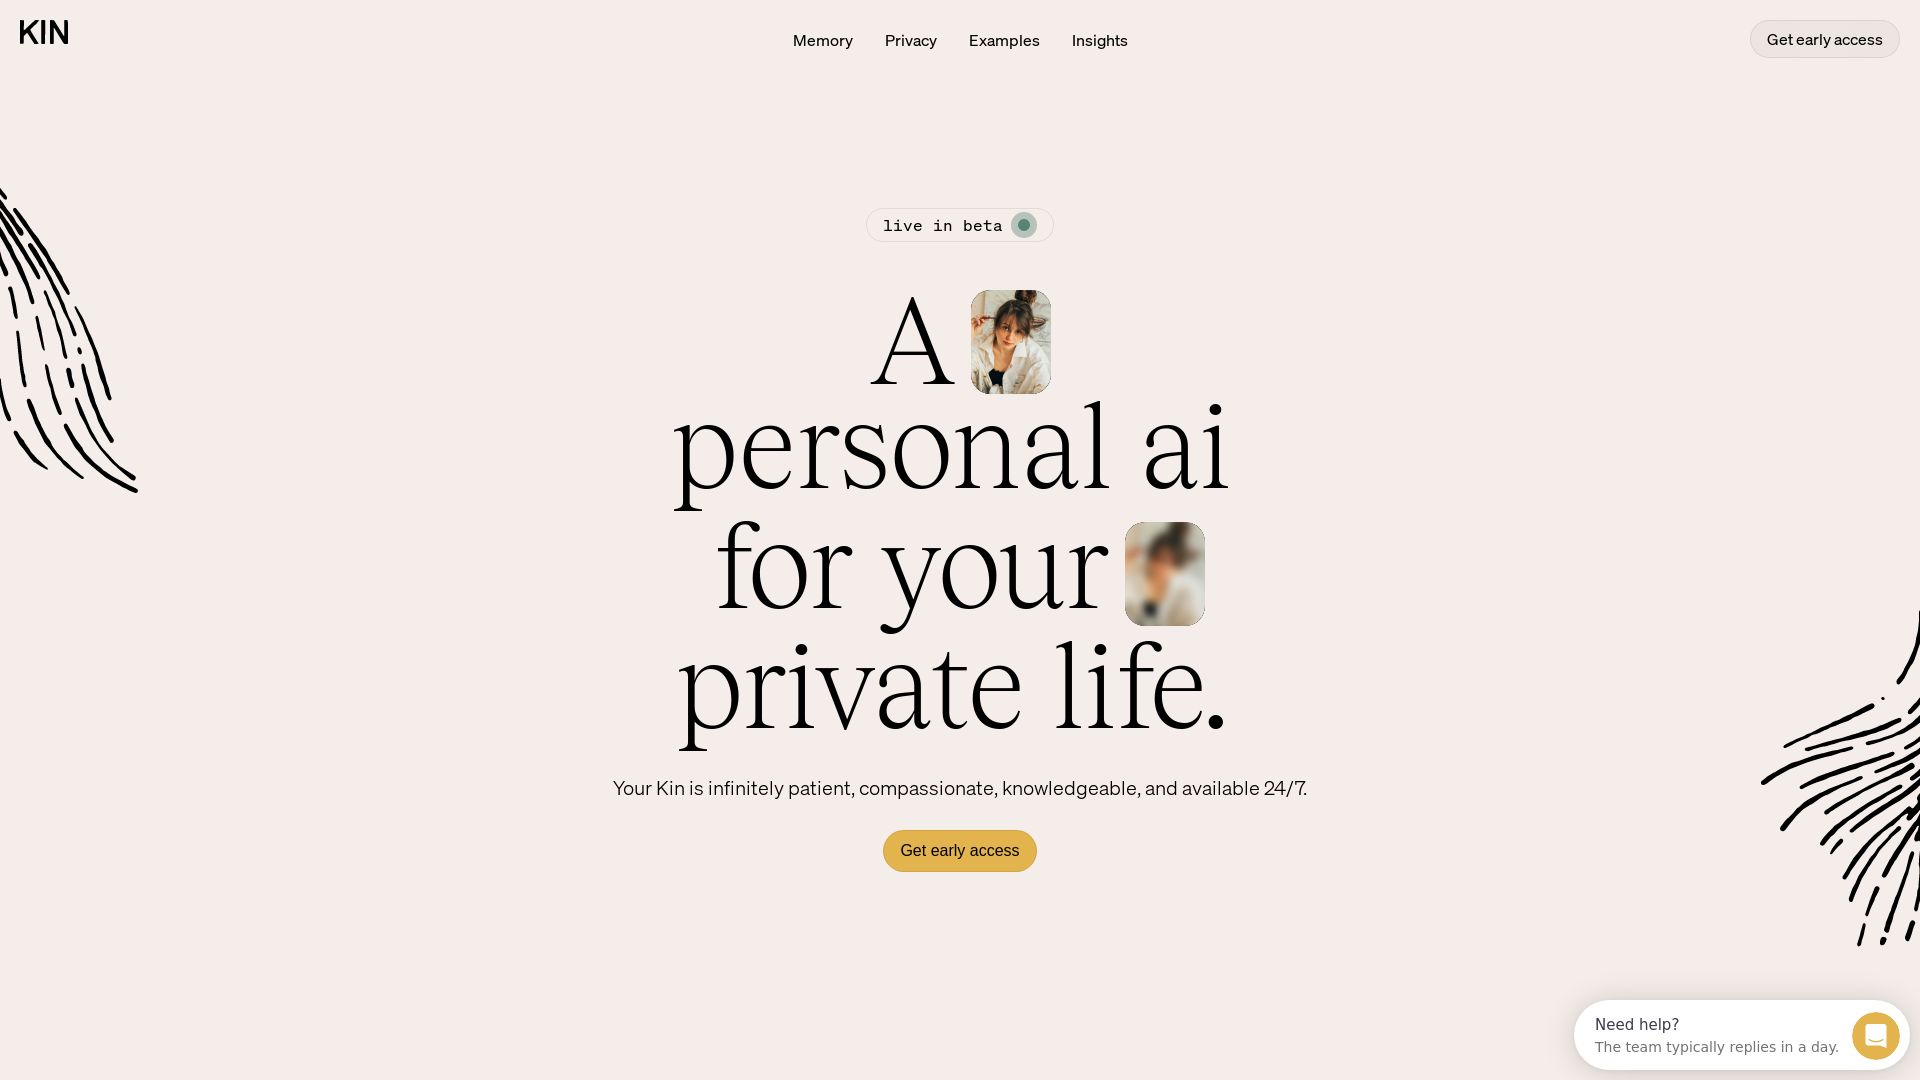 Kin - A personal AI for your private life.